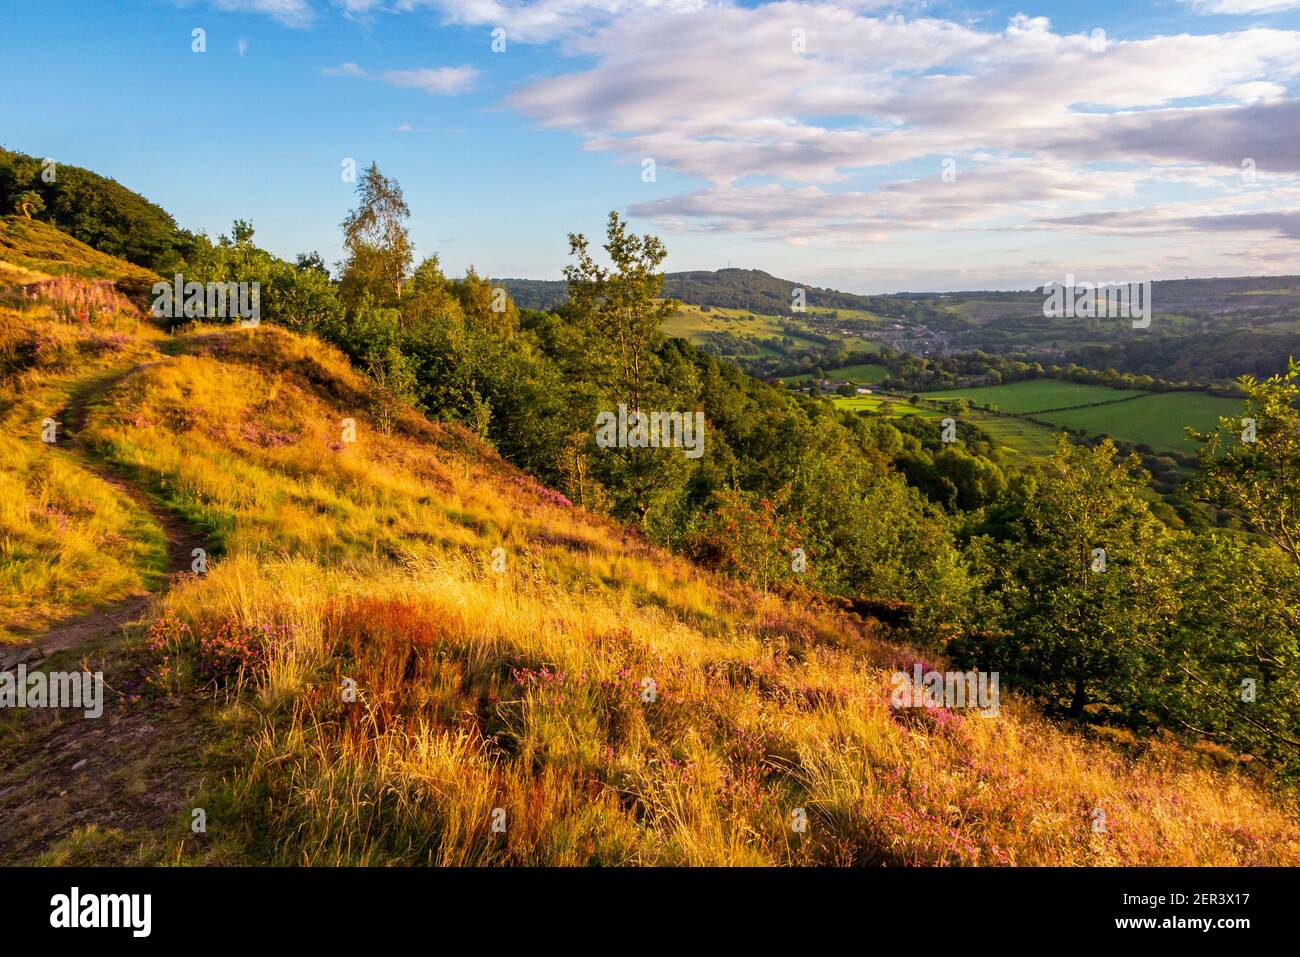 View over landscape at Starholmes near Matlock in the Derbyshire Dales Peak District England UK with trees in late summer colour. Stock Photo